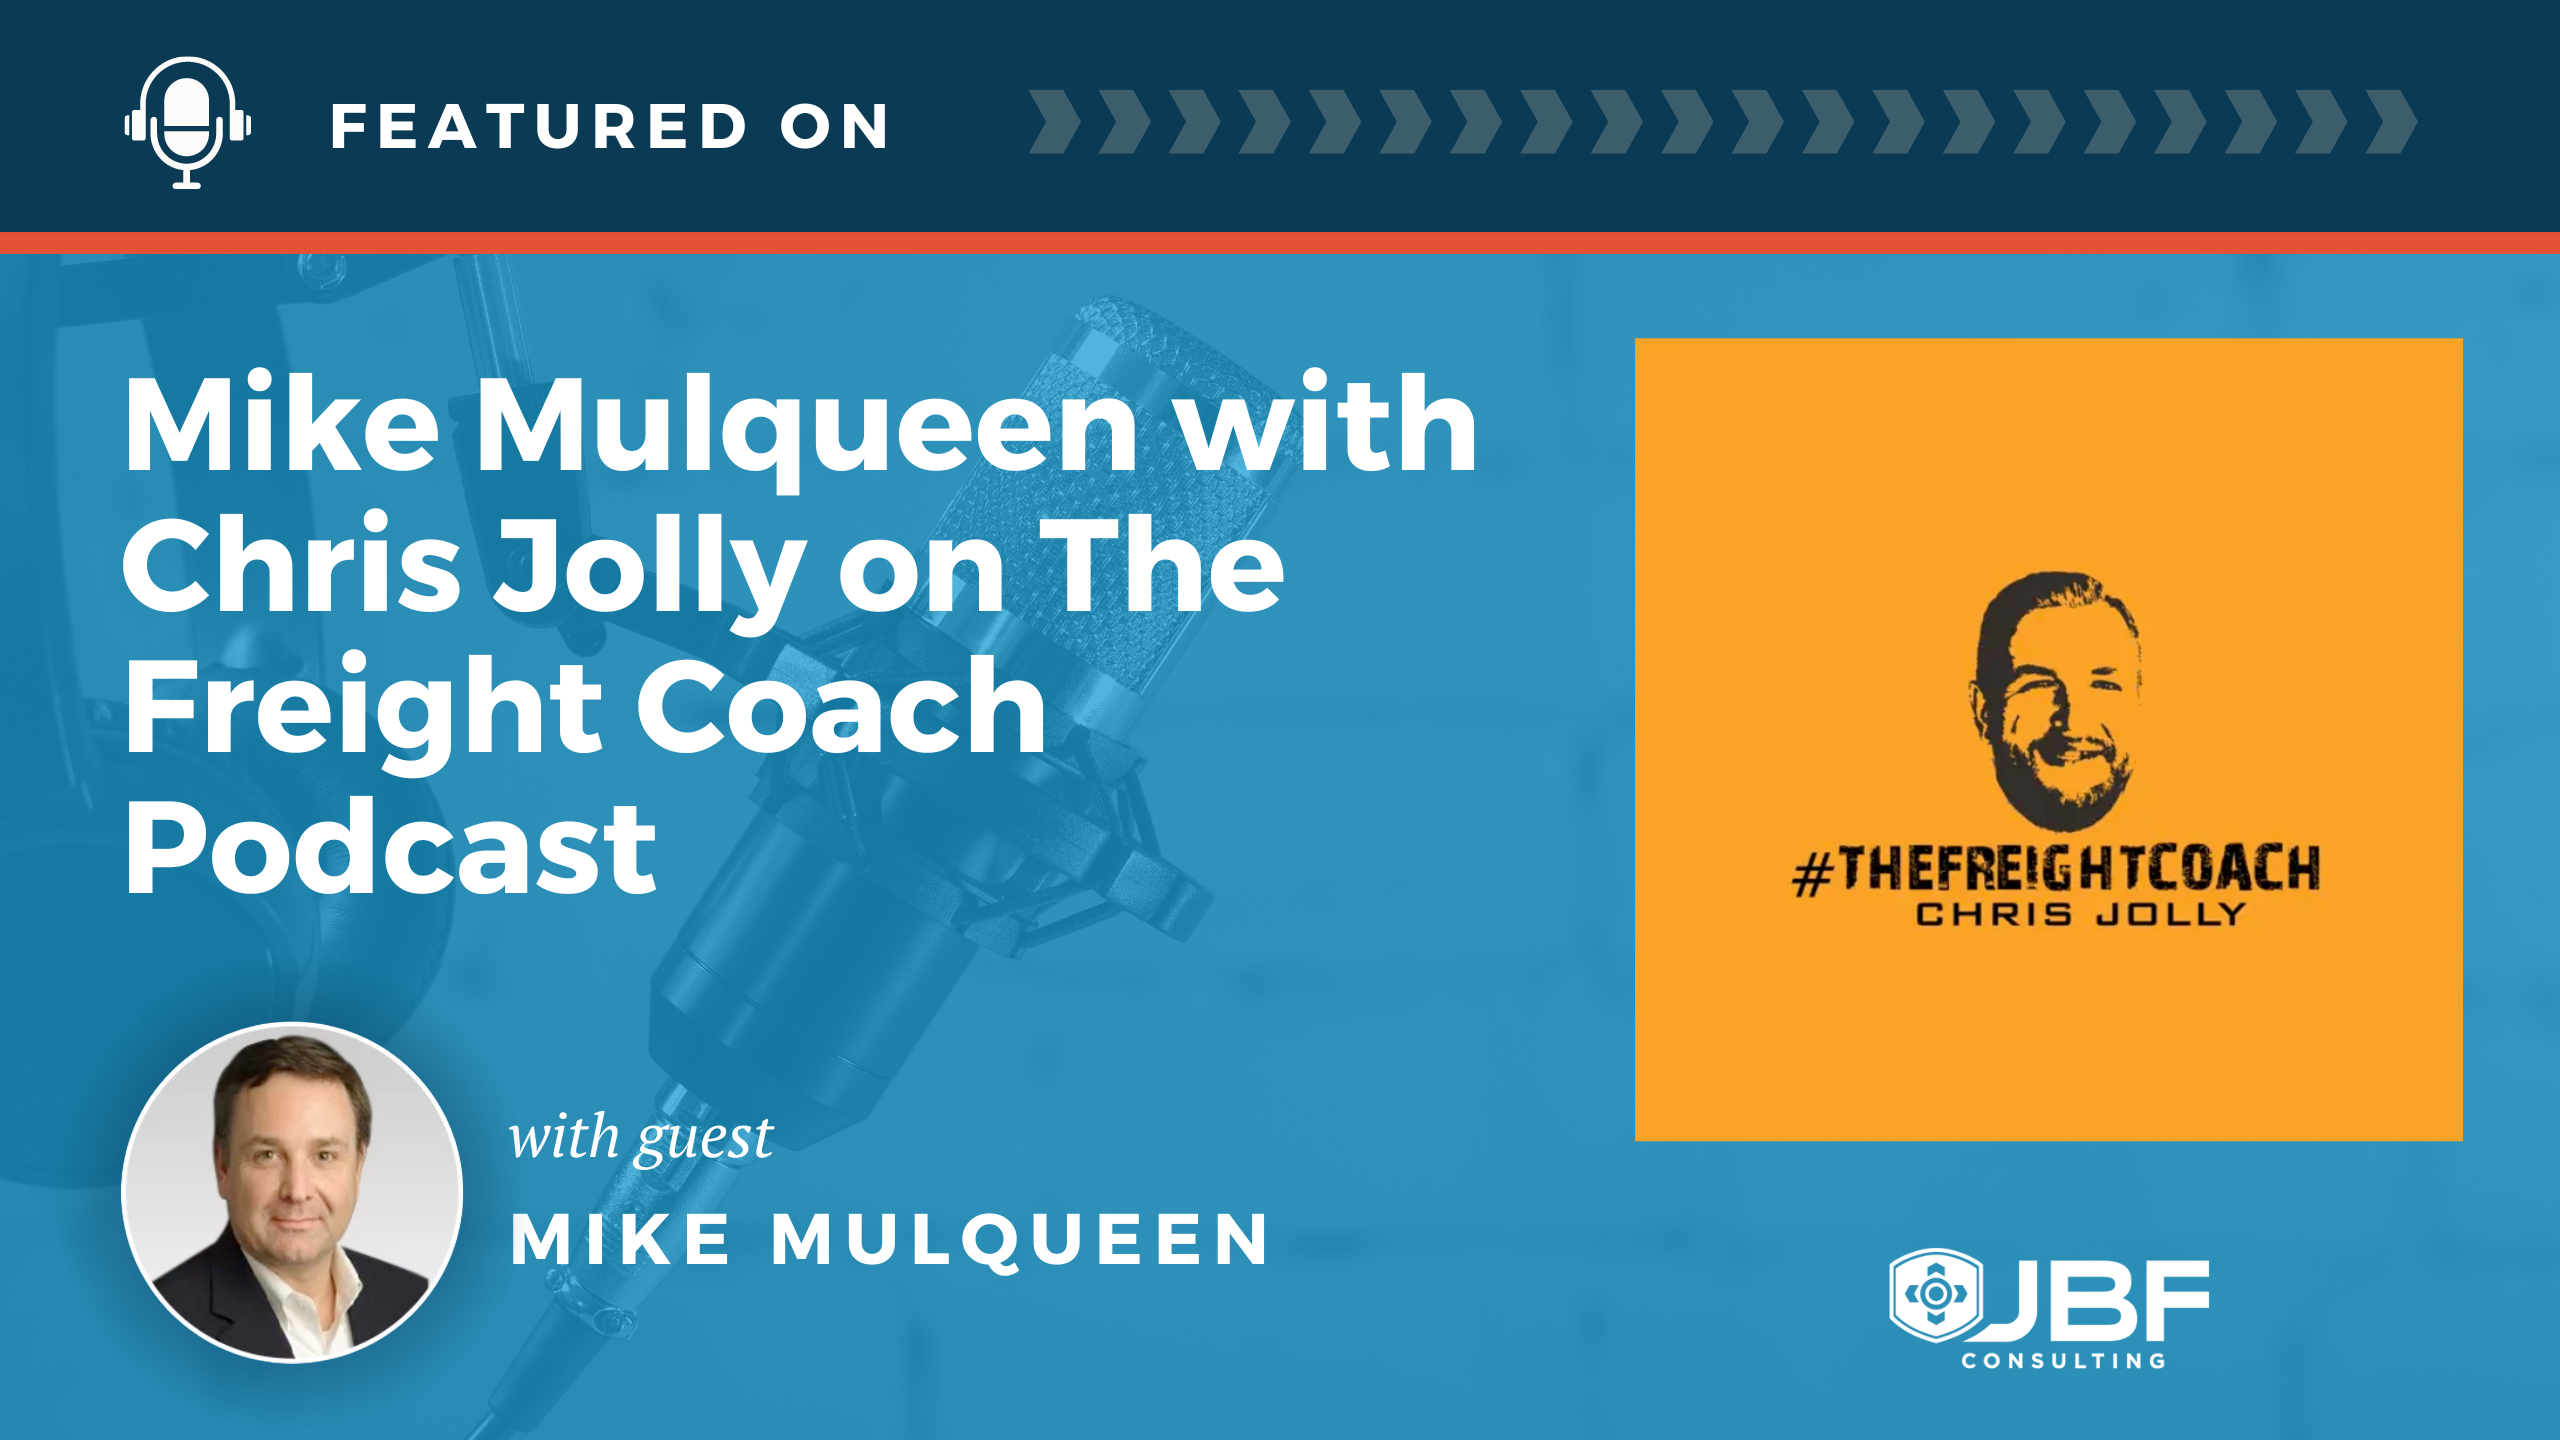 The Freight Coach - Mulqueen